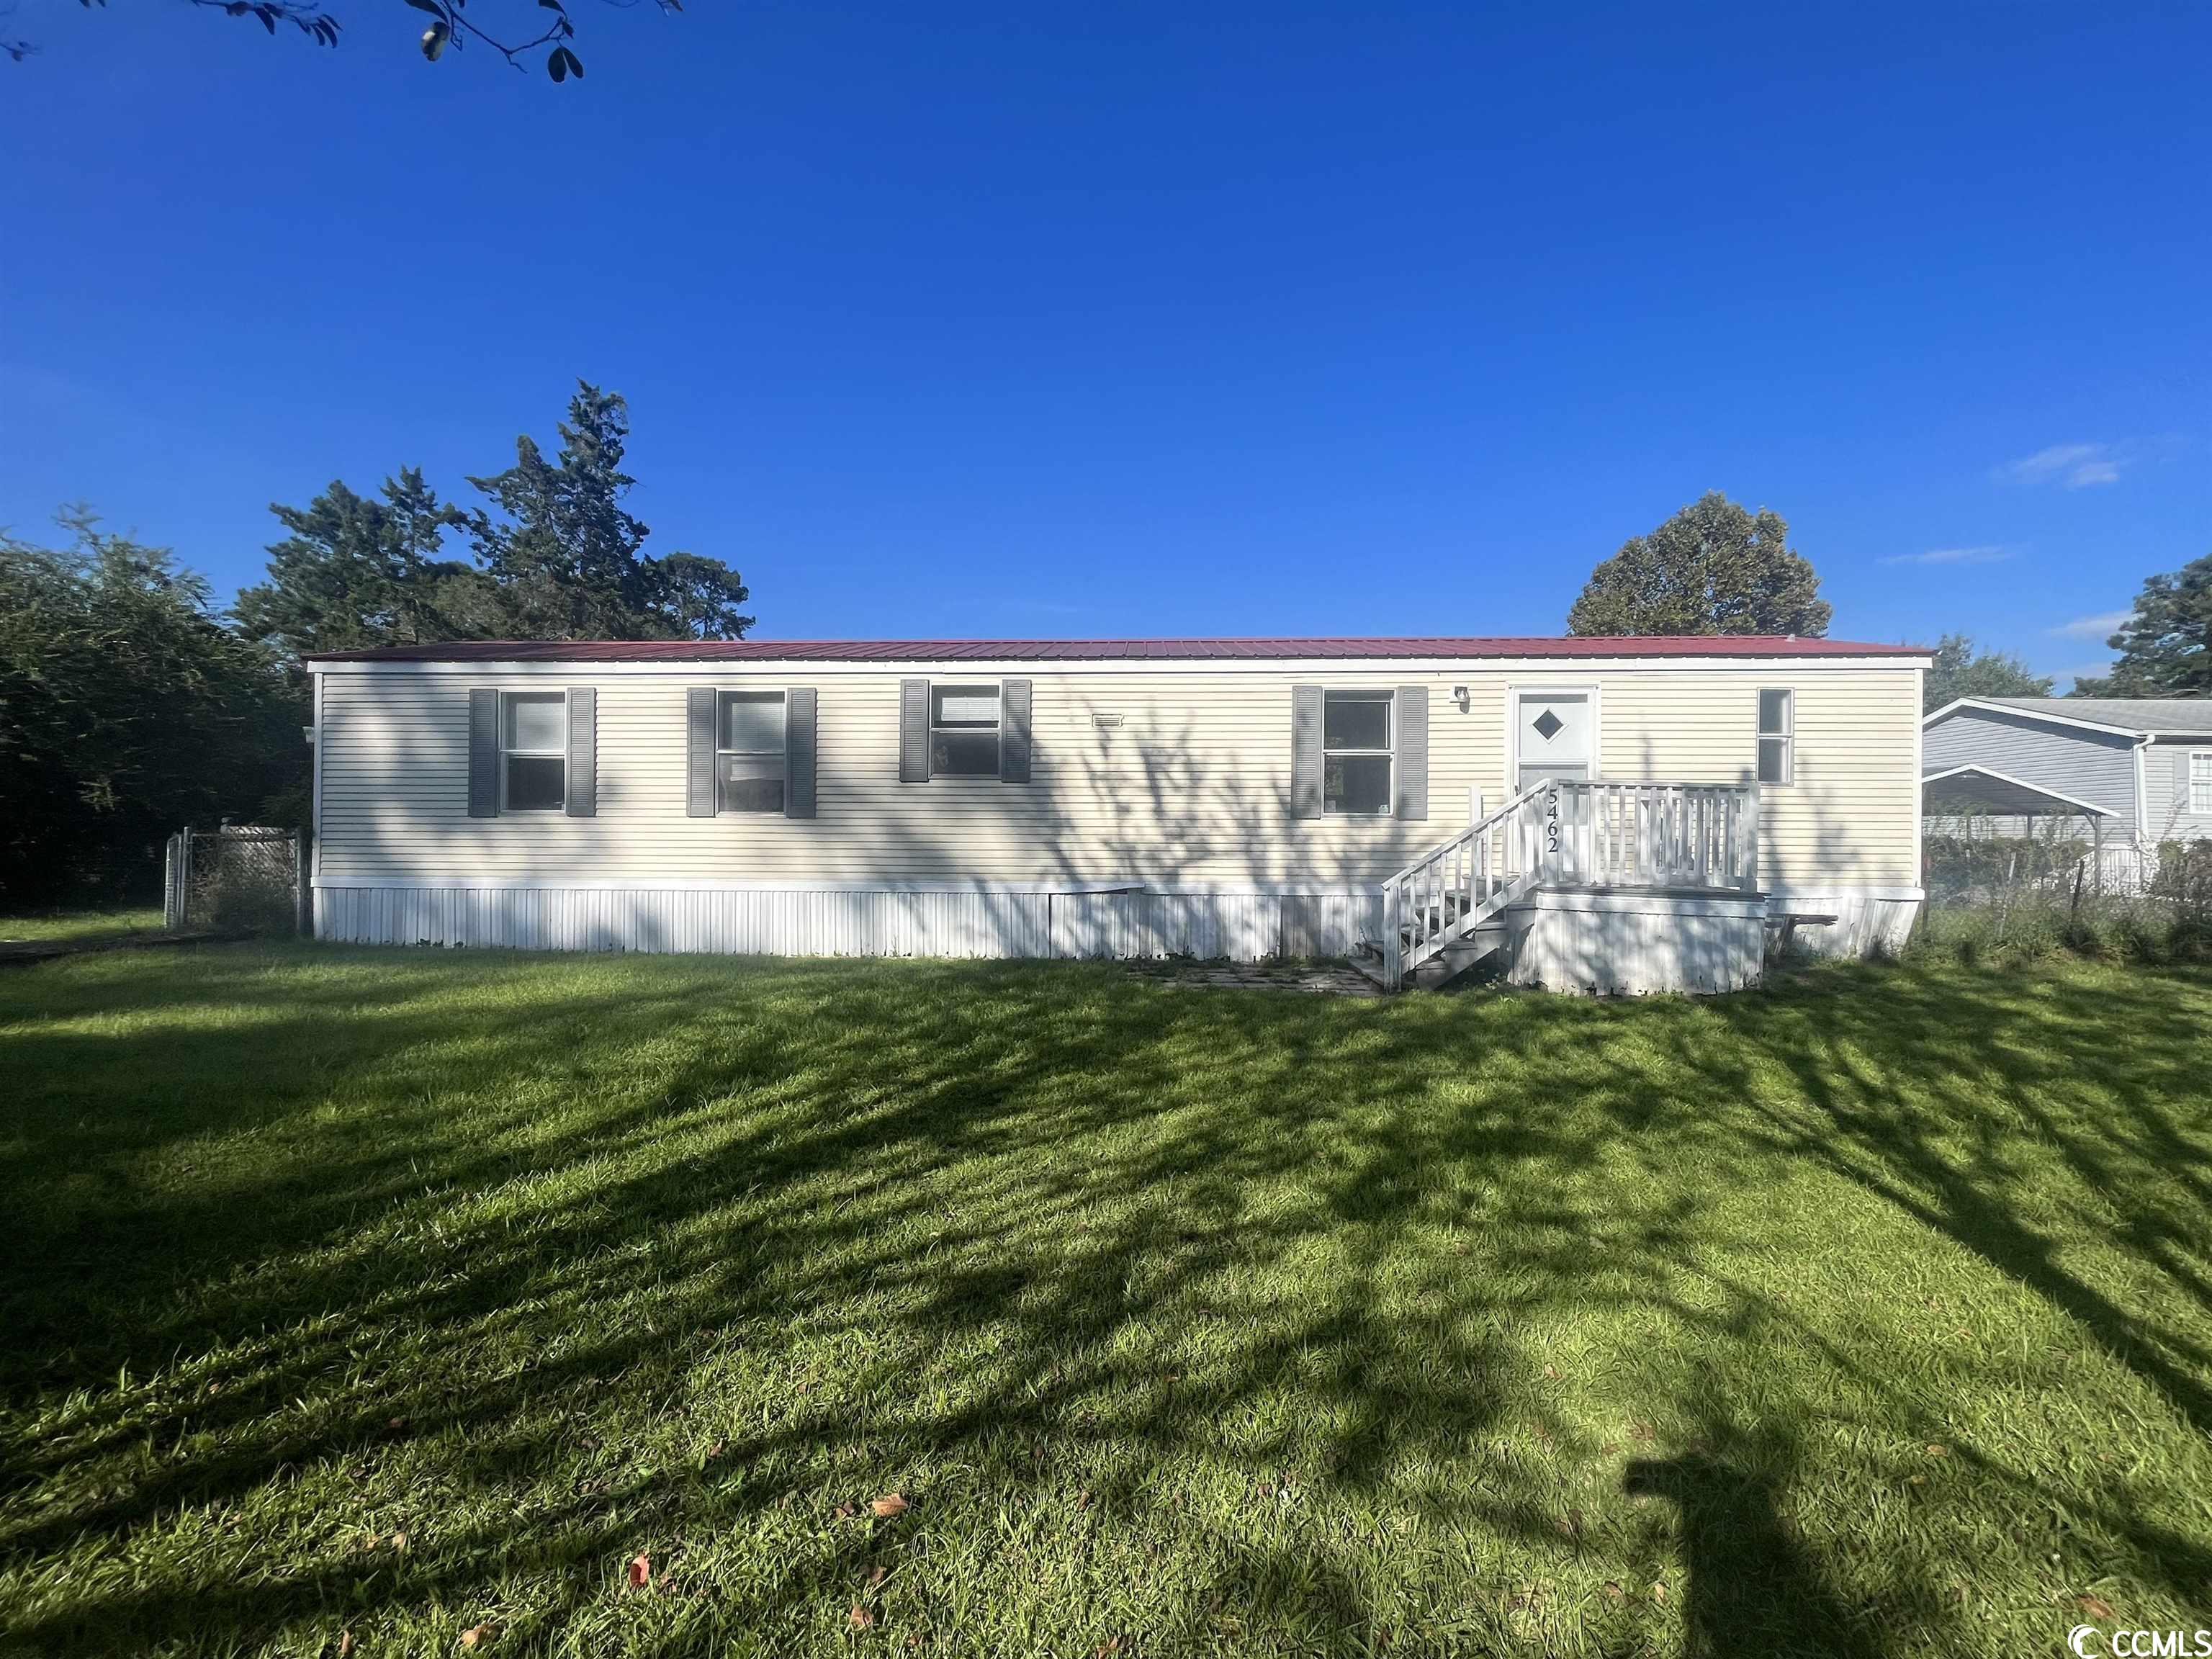 two bedroom 2 bath mobile home with large fenced in back yard and detached shed! no hoa!  lvp flooring throughout home. roof was installed in 2017. ready to make this your home, or add it to your rental portfolio today!!  just a few minutes from downtown conway. seller is selling in as-is condition.